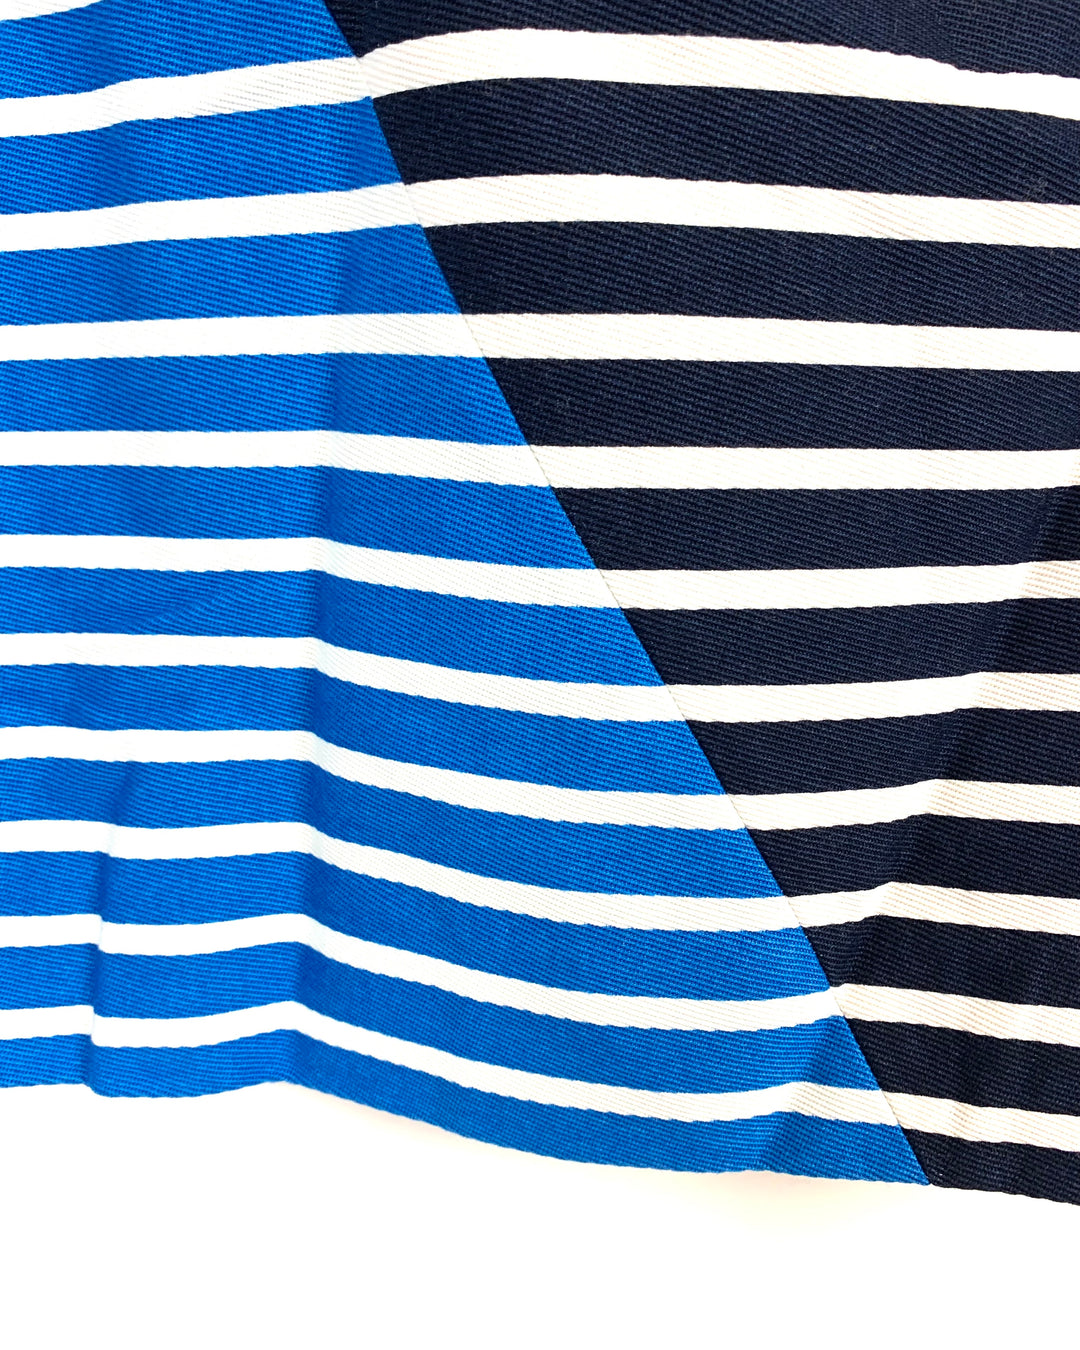 Blue and Black Skirt with Stripes - Size 4